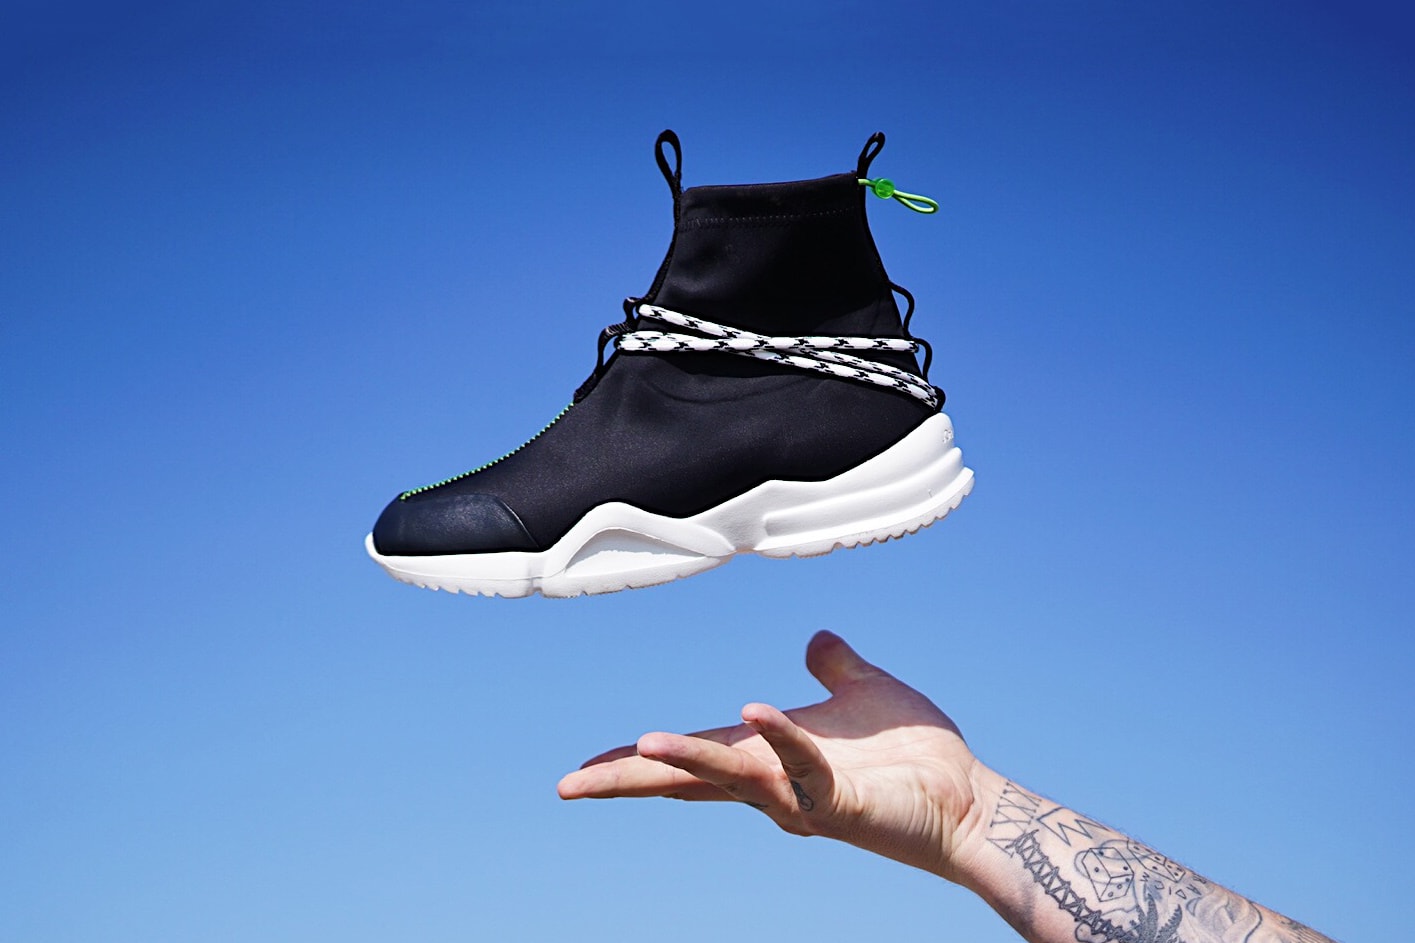 John Geiger 002 exclusive first look drop info imagery drop release date august 31 2018 shoe signature web store buy purchase sale sell neoprene upper eva outsole mid